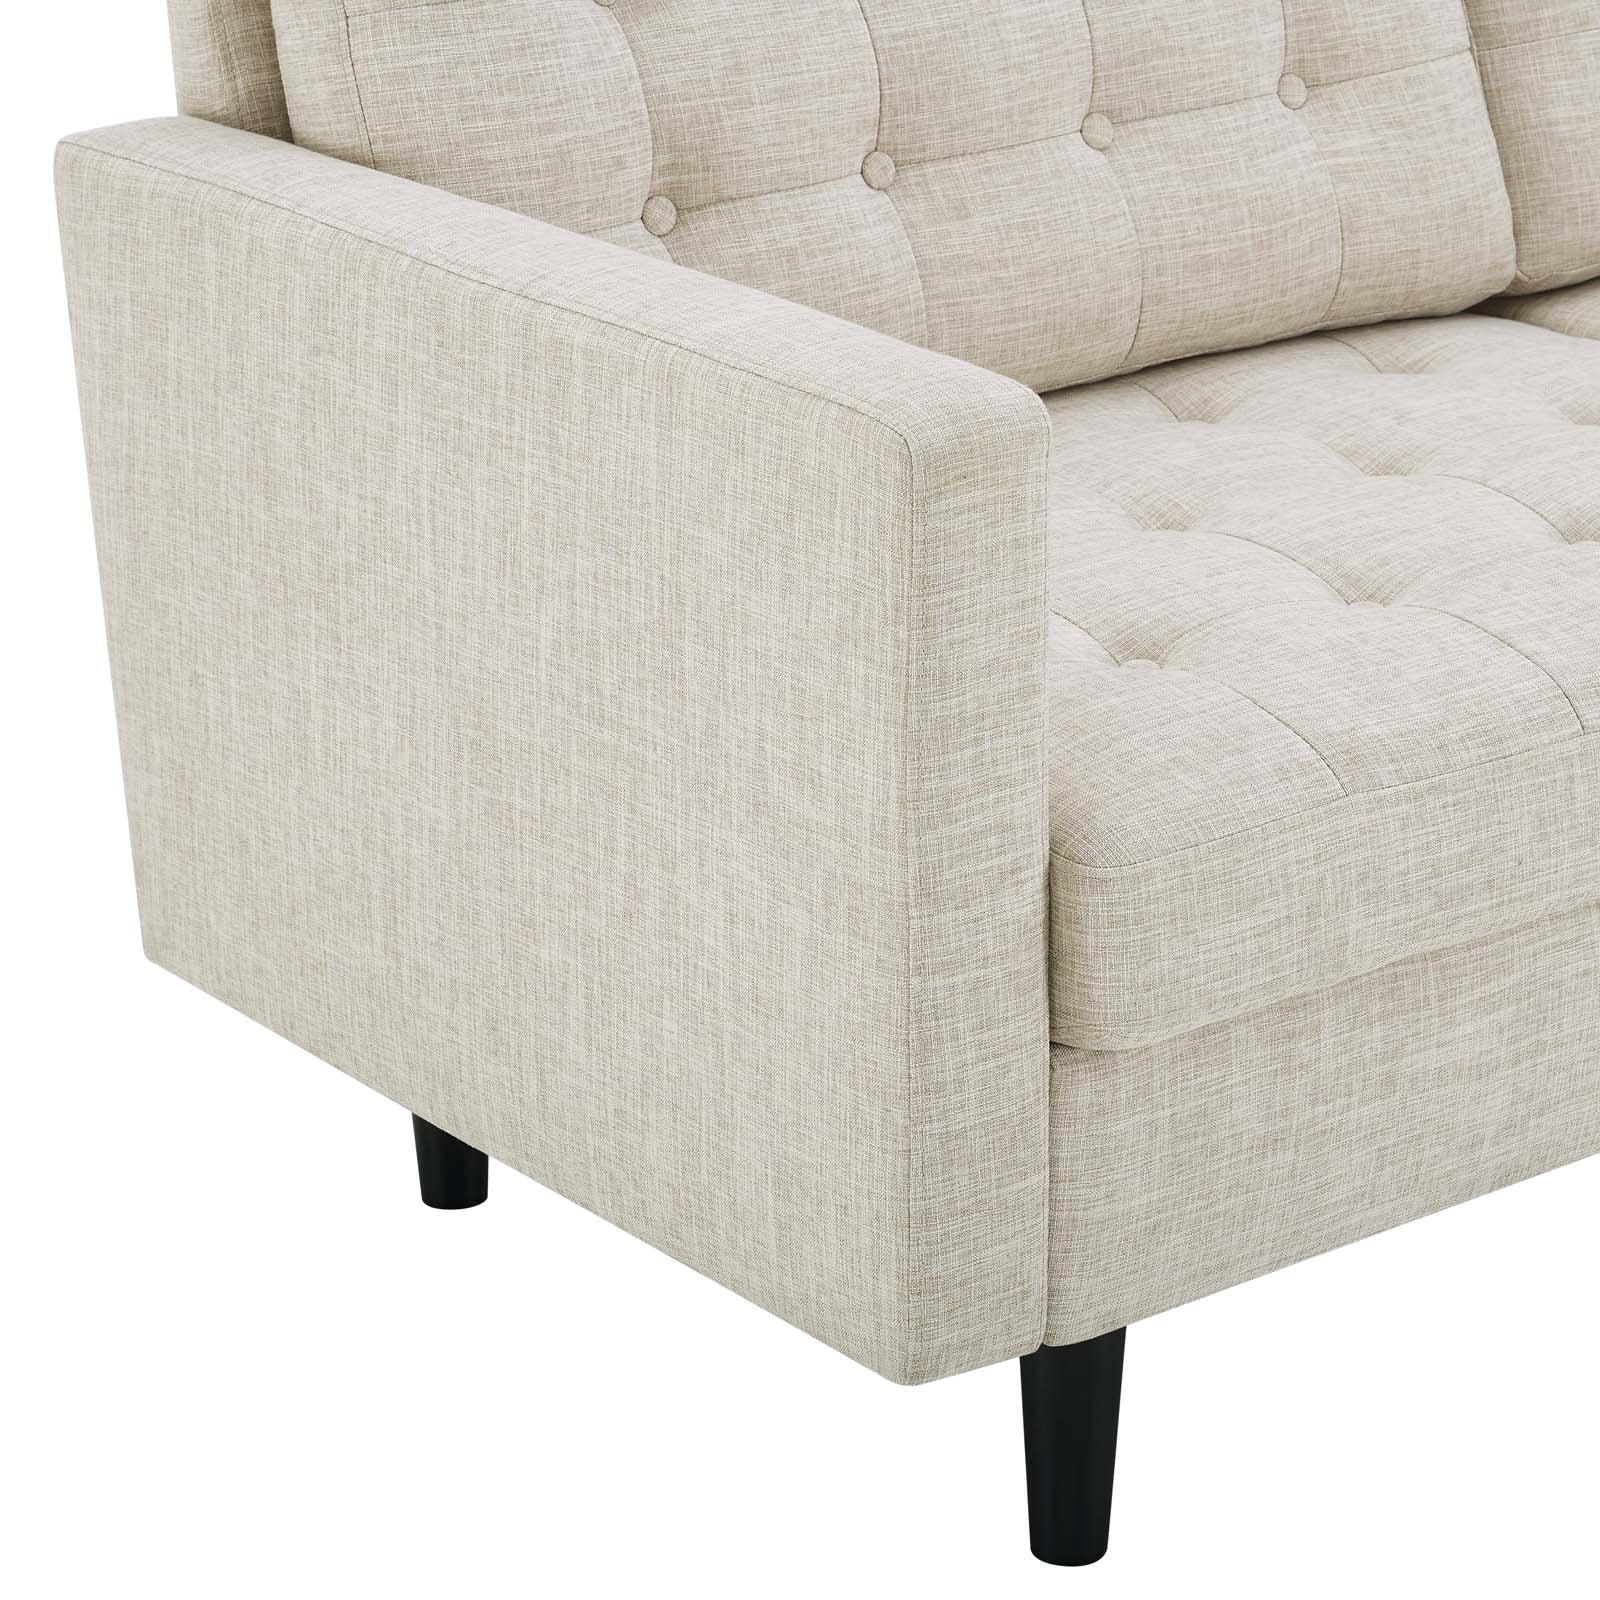 Modway Sofas & Couches - Exalt Tufted Fabric Sofa Beige